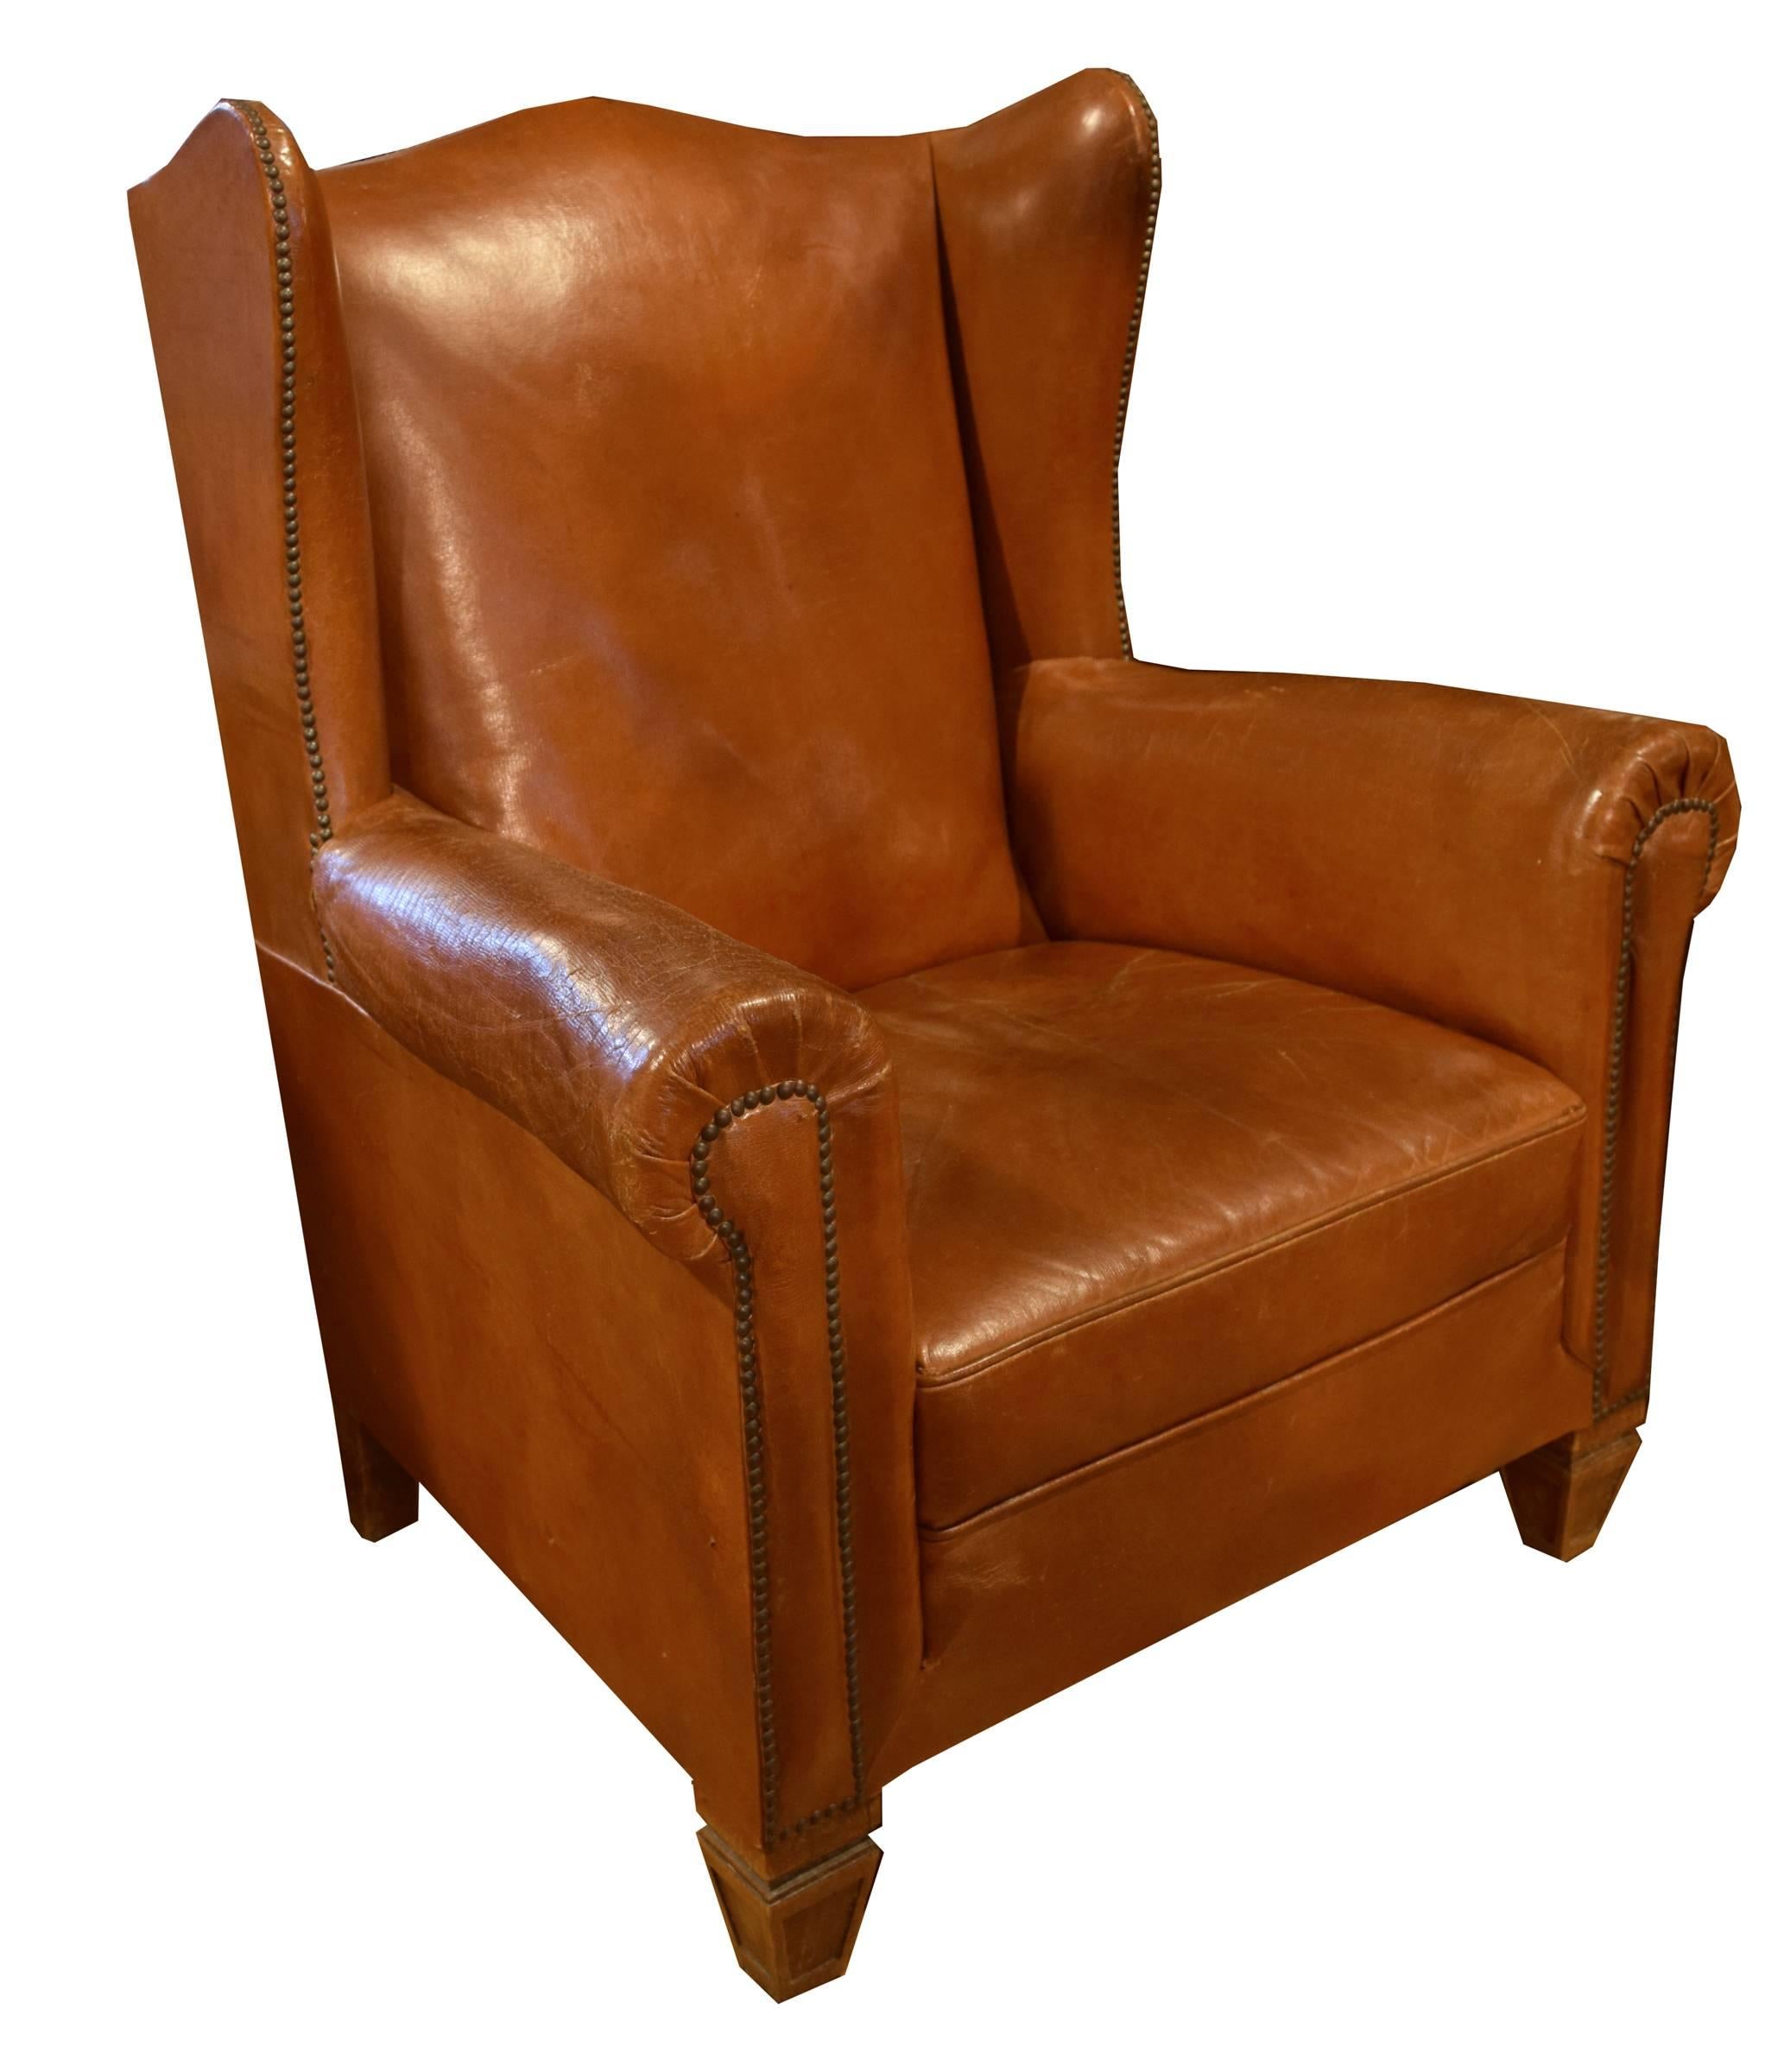 A cognac colored leather wingback chair. This leather chair has nice geometric feet and gently curved arms with studded detailing.